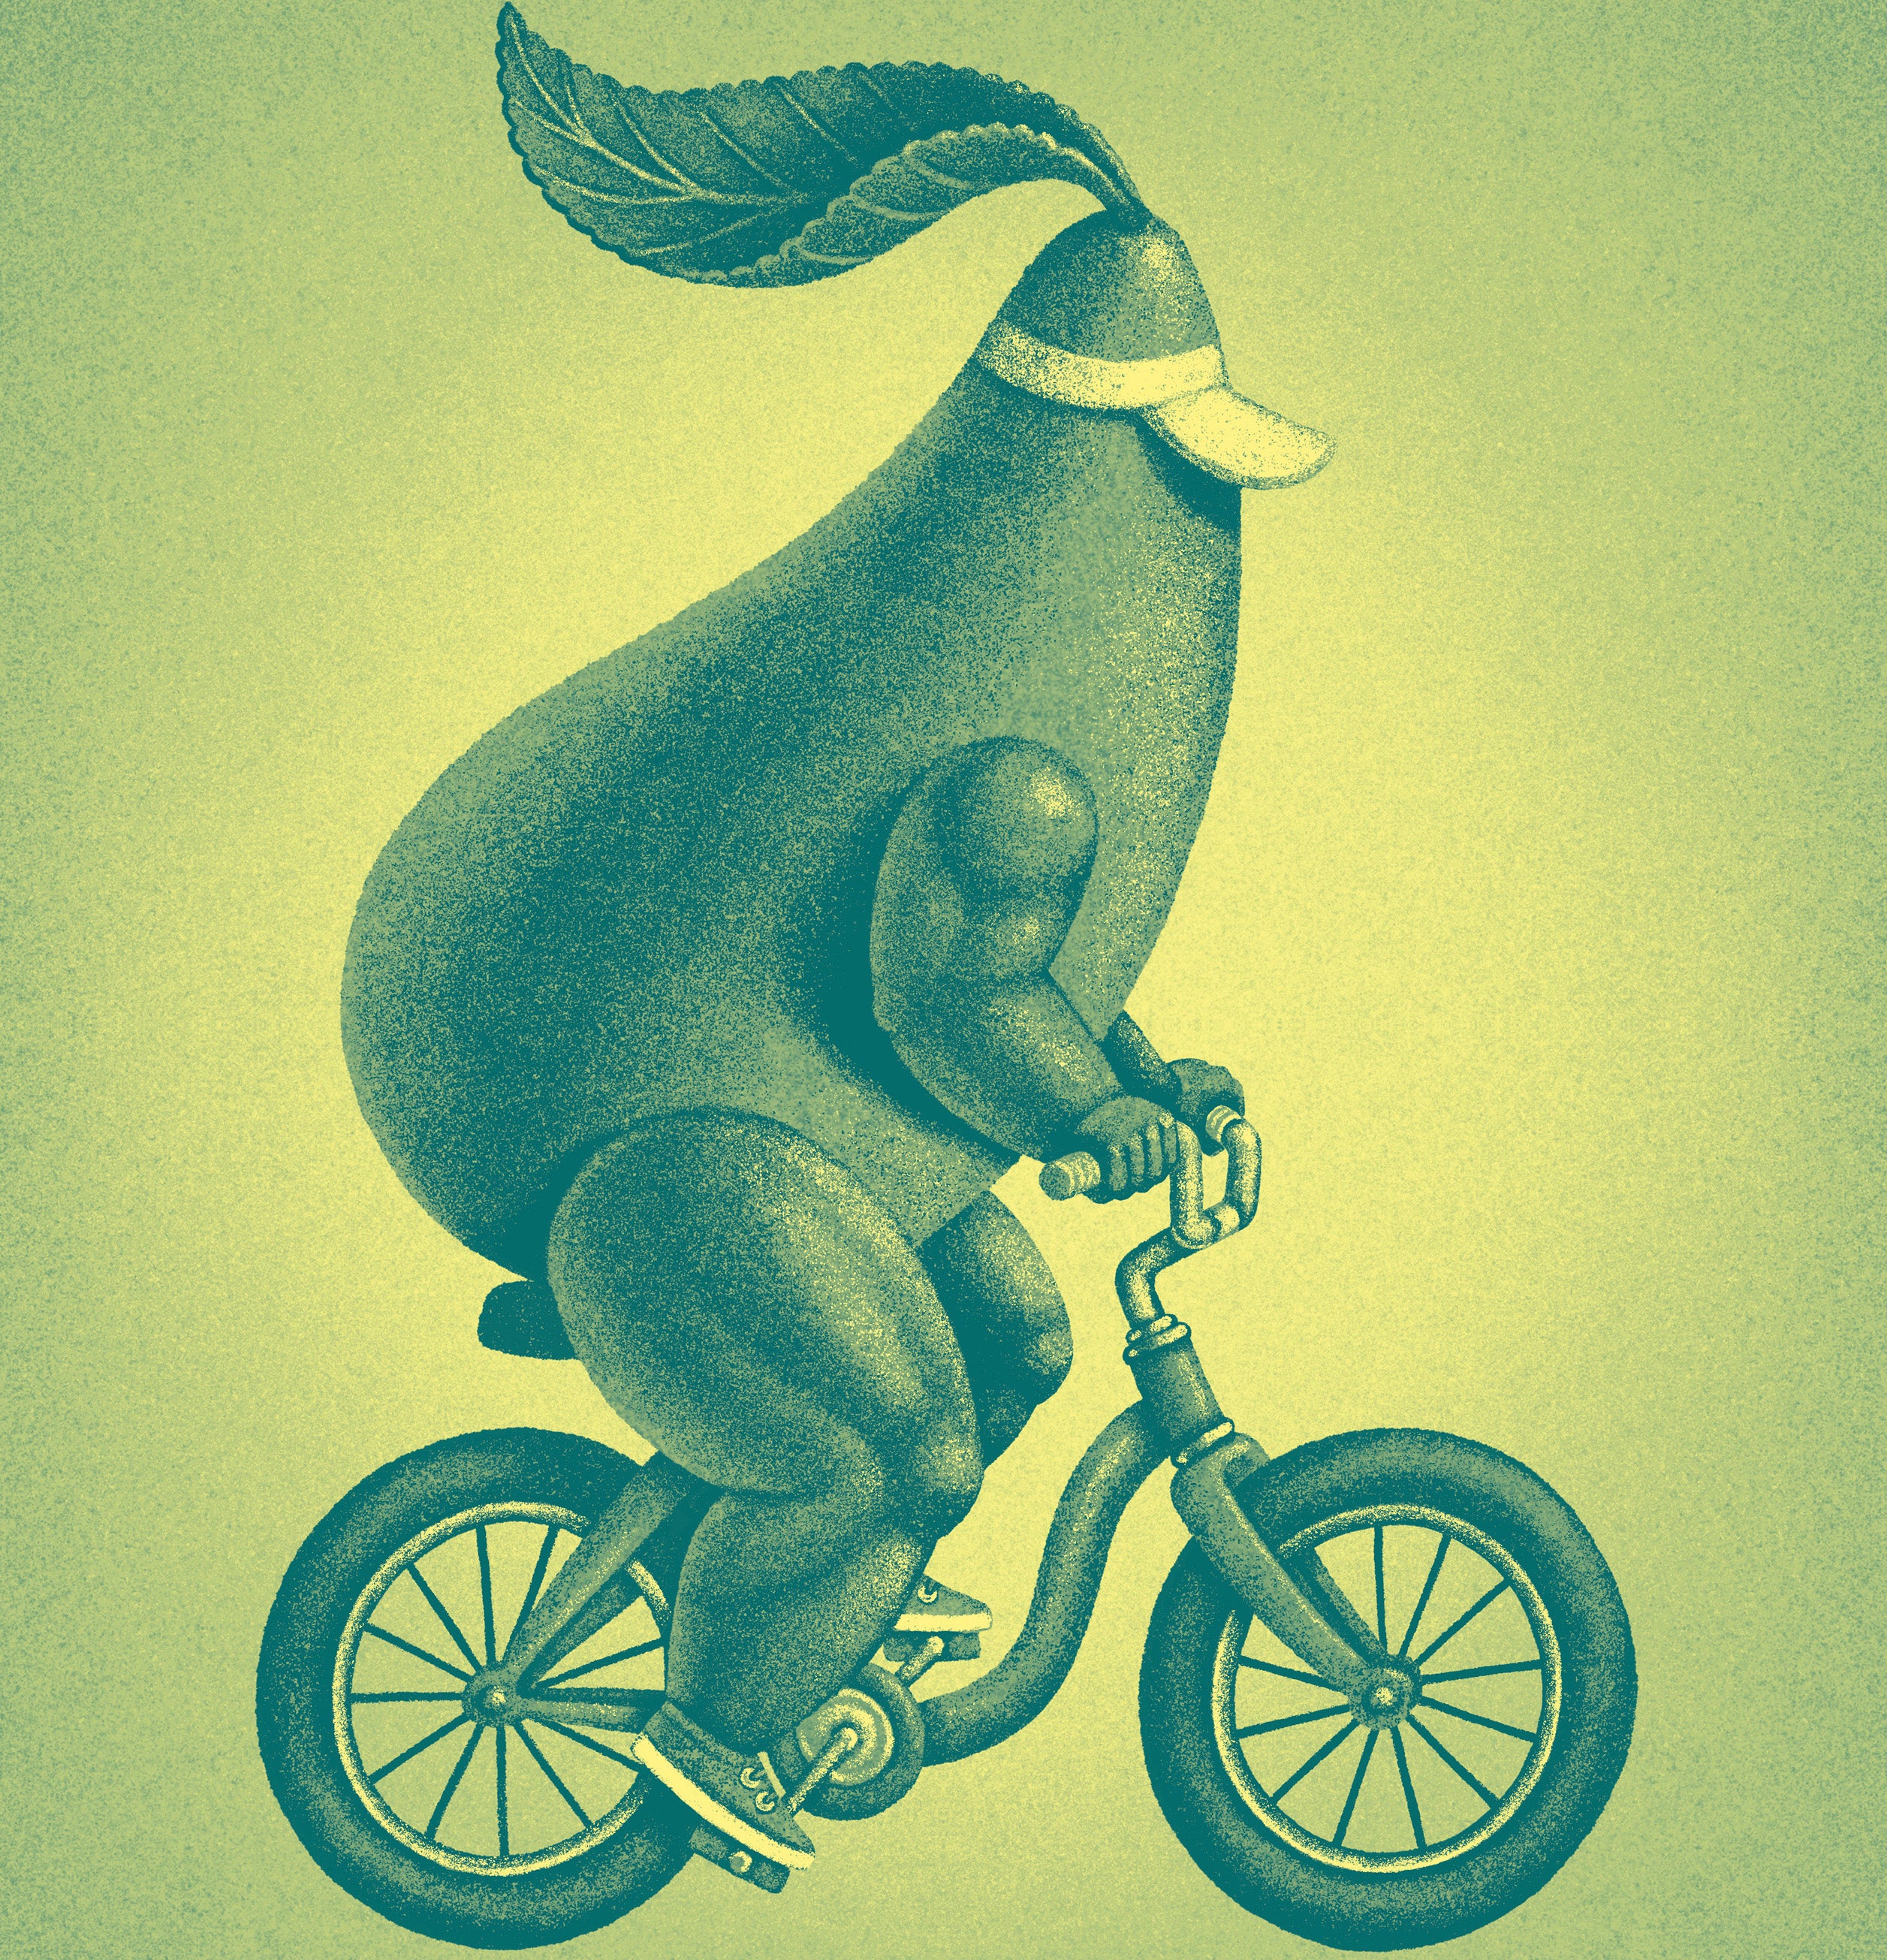 Illustration of a pear riding a bike against a green background.